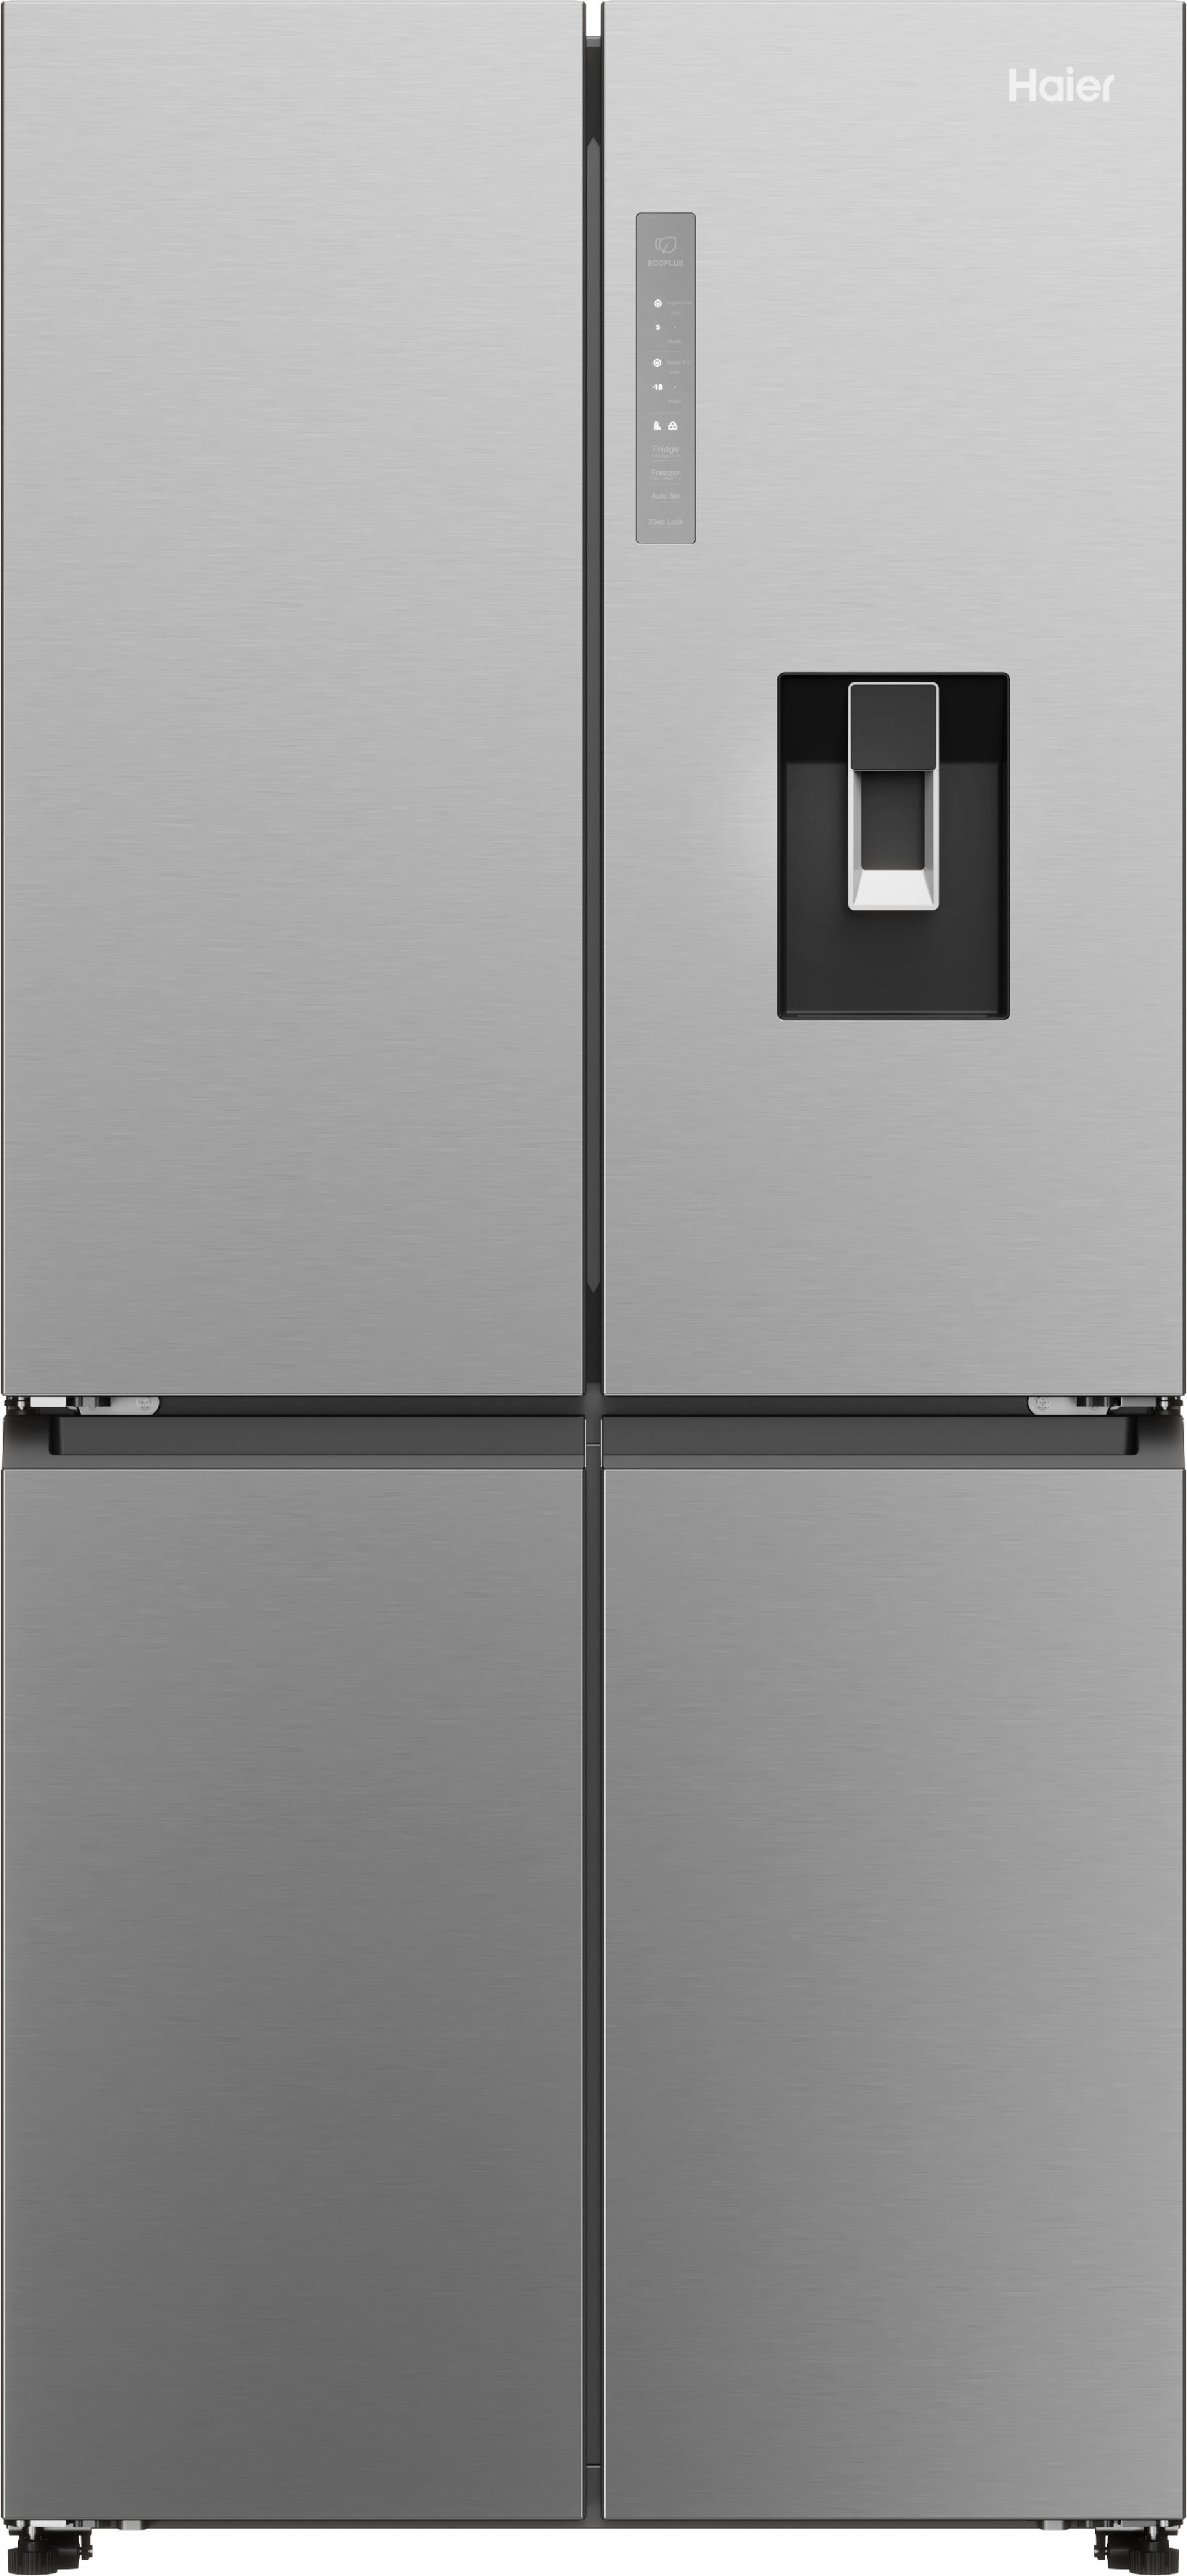 Haier HCR3818EWMM Total No Frost American Fridge Freezer - Stainless Steel - E Rated, Stainless Steel